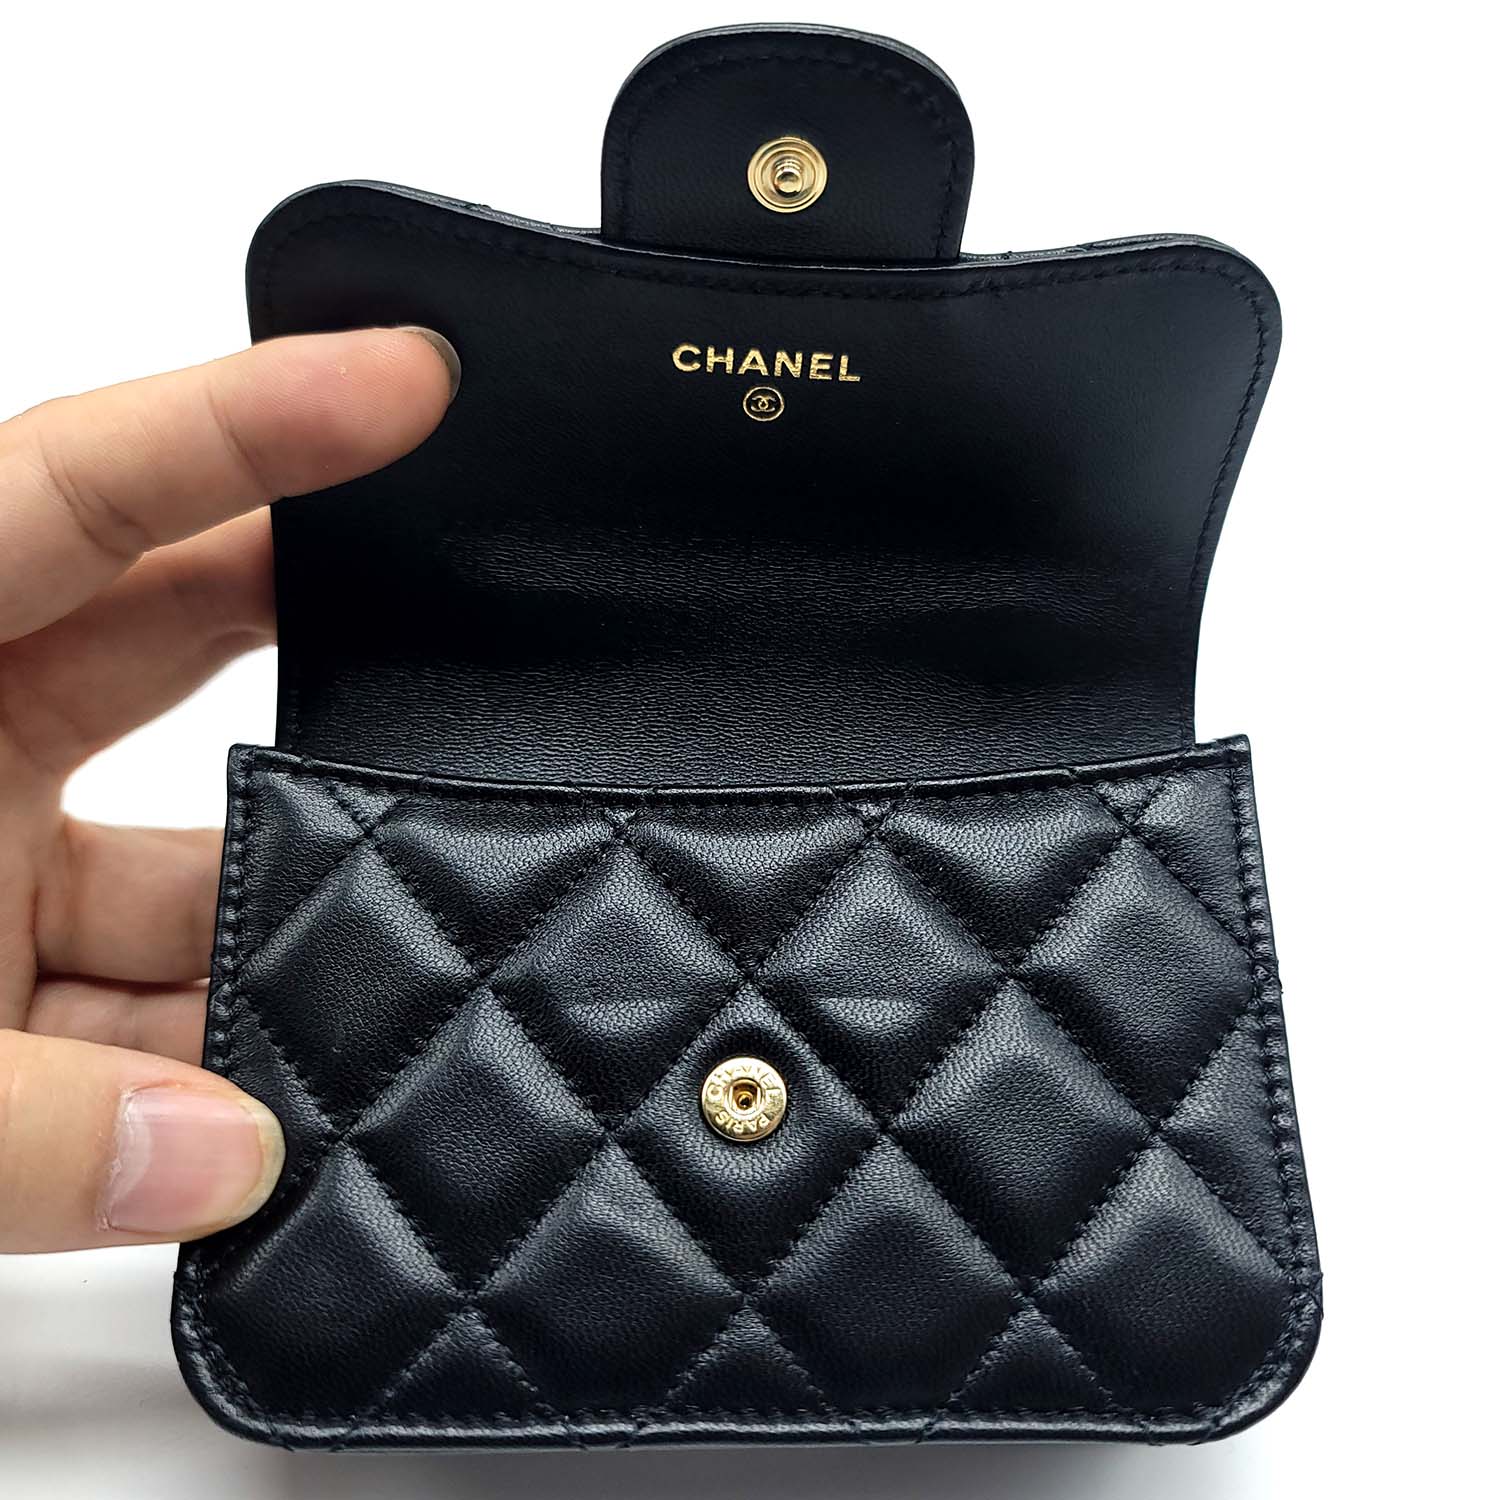 CHANEL Lambskin Quilted Zip Coin Purse Black 373706